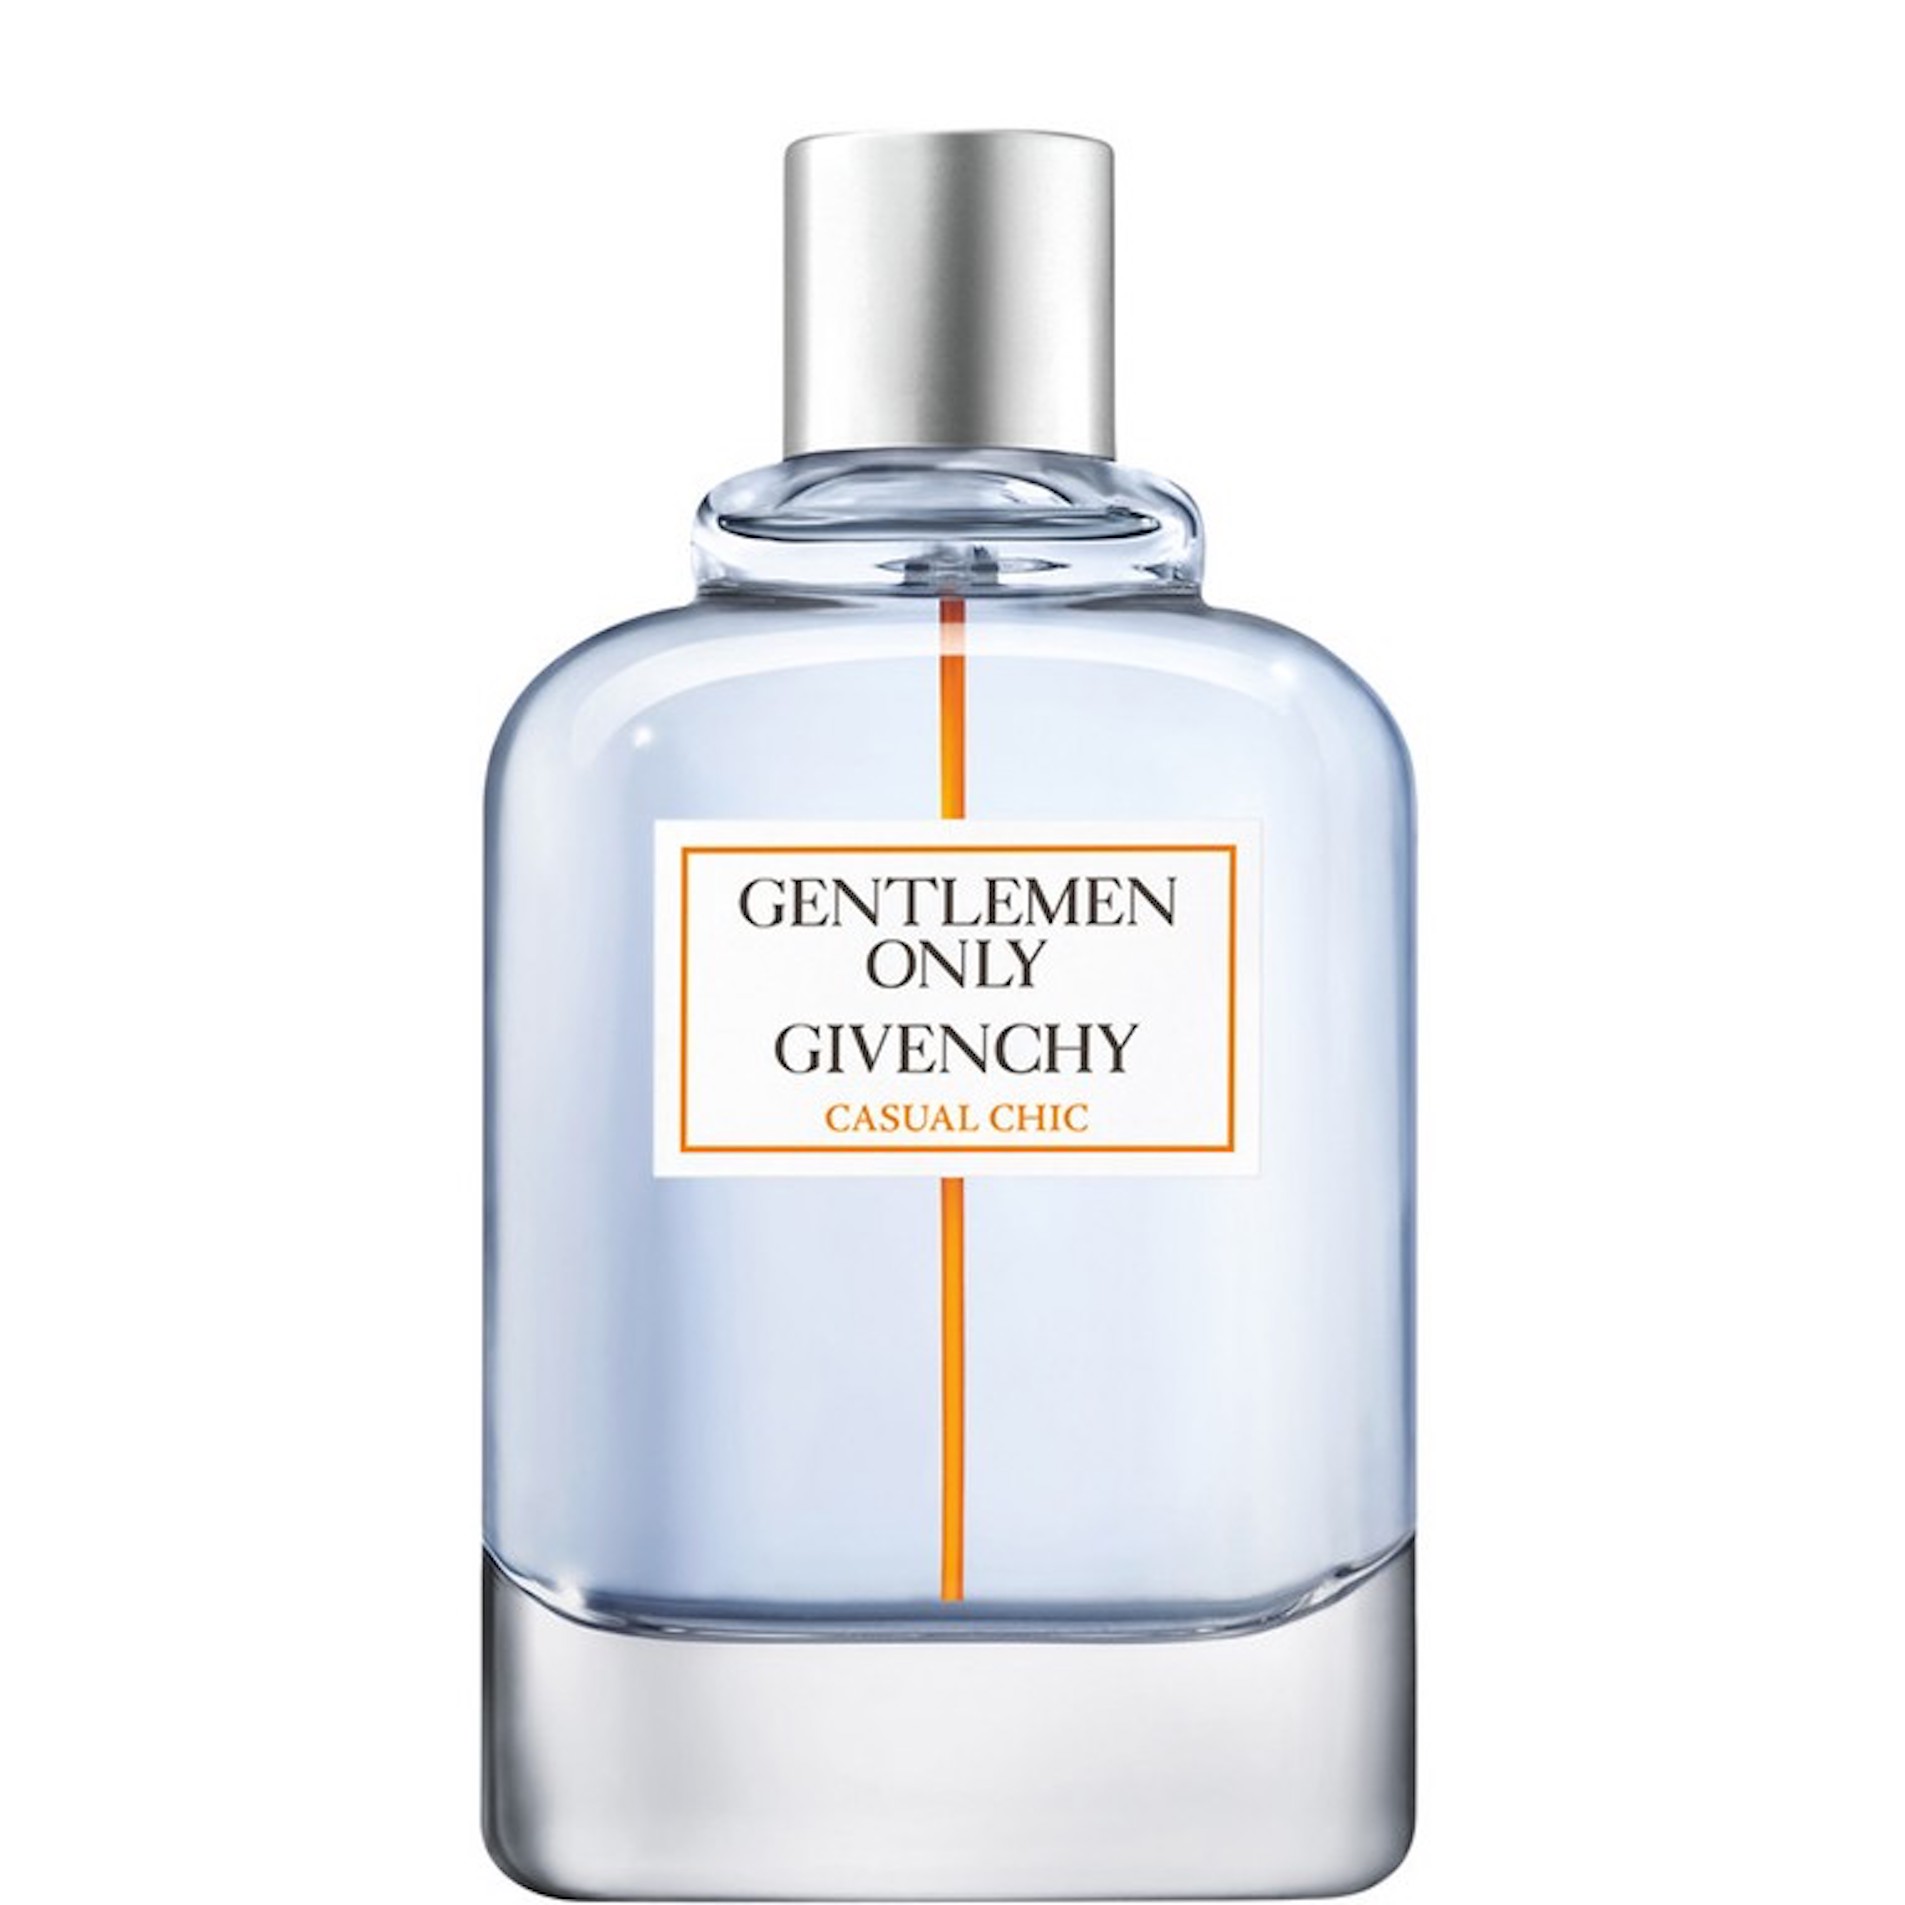 Bottle of Givenchy Gentlemen Only Casual Chic